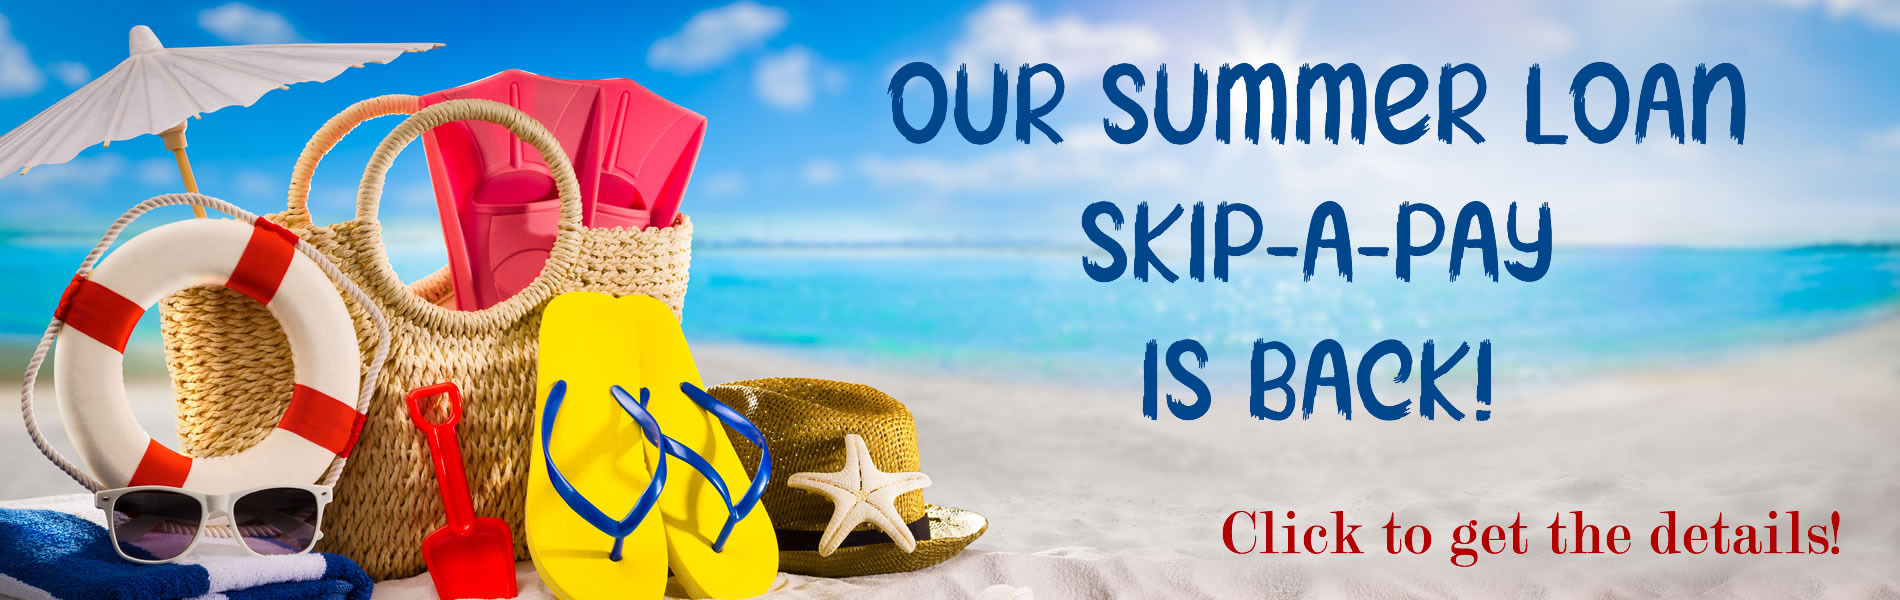 Our summer loan skip a pay is back.  click for details